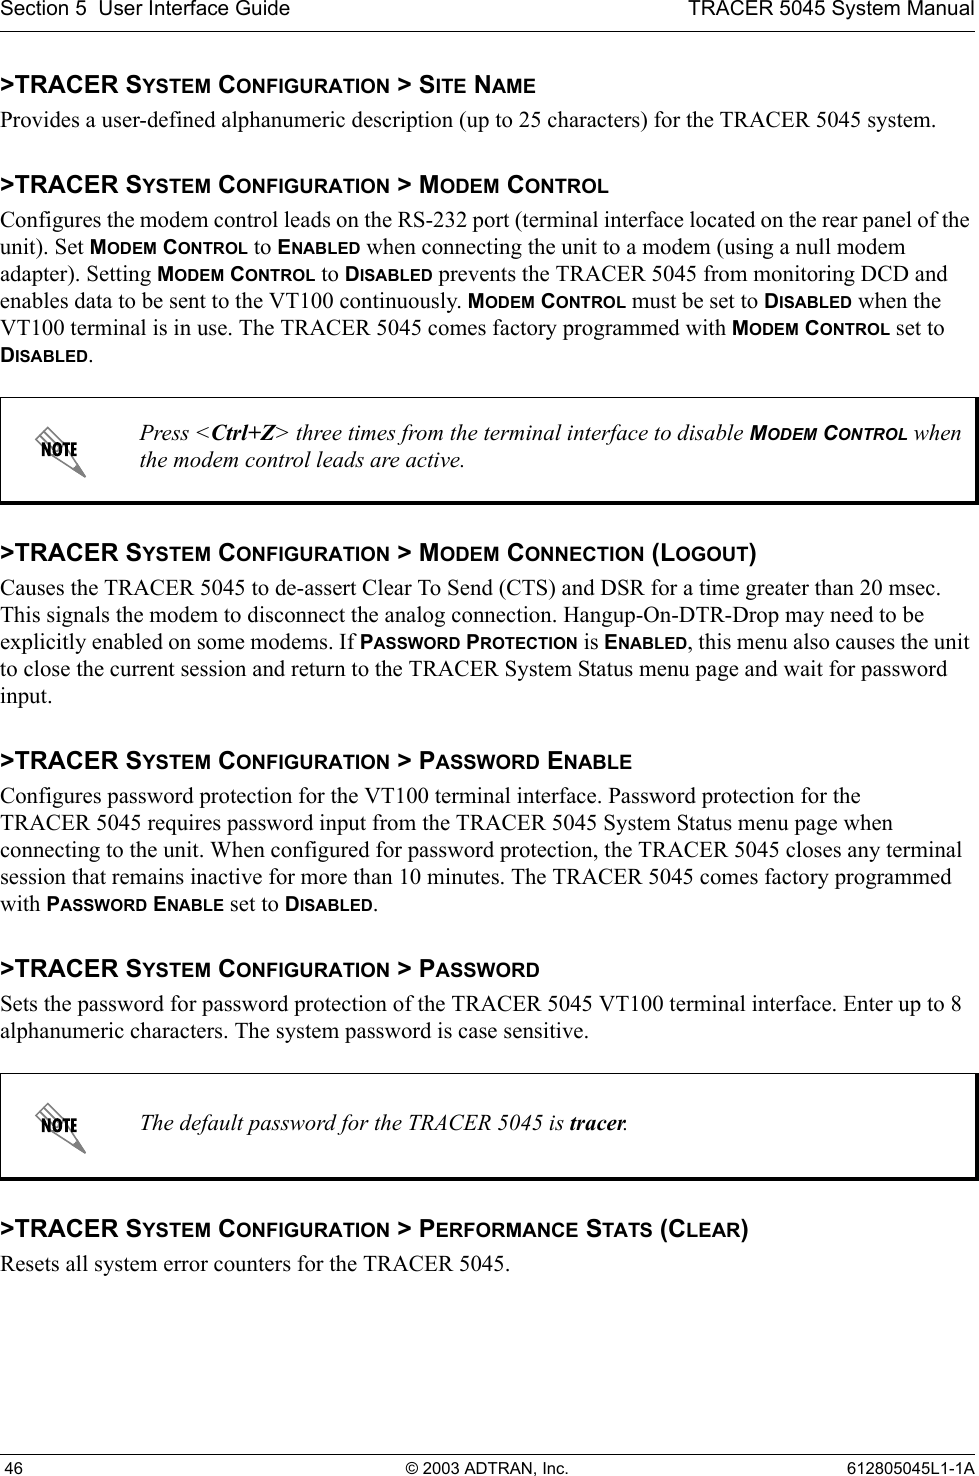 Section 5  User Interface Guide TRACER 5045 System Manual 46 © 2003 ADTRAN, Inc. 612805045L1-1A&gt;TRACER SYSTEM CONFIGURATION &gt; SITE NAMEProvides a user-defined alphanumeric description (up to 25 characters) for the TRACER 5045 system.&gt;TRACER SYSTEM CONFIGURATION &gt; MODEM CONTROLConfigures the modem control leads on the RS-232 port (terminal interface located on the rear panel of the unit). Set MODEM CONTROL to ENABLED when connecting the unit to a modem (using a null modem adapter). Setting MODEM CONTROL to DISABLED prevents the TRACER 5045 from monitoring DCD and enables data to be sent to the VT100 continuously. MODEM CONTROL must be set to DISABLED when the VT100 terminal is in use. The TRACER 5045 comes factory programmed with MODEM CONTROL set to DISABLED.&gt;TRACER SYSTEM CONFIGURATION &gt; MODEM CONNECTION (LOGOUT)Causes the TRACER 5045 to de-assert Clear To Send (CTS) and DSR for a time greater than 20 msec. This signals the modem to disconnect the analog connection. Hangup-On-DTR-Drop may need to be explicitly enabled on some modems. If PASSWORD PROTECTION is ENABLED, this menu also causes the unit to close the current session and return to the TRACER System Status menu page and wait for password input.&gt;TRACER SYSTEM CONFIGURATION &gt; PASSWORD ENABLEConfigures password protection for the VT100 terminal interface. Password protection for the TRACER 5045 requires password input from the TRACER 5045 System Status menu page when connecting to the unit. When configured for password protection, the TRACER 5045 closes any terminal session that remains inactive for more than 10 minutes. The TRACER 5045 comes factory programmed with PASSWORD ENABLE set to DISABLED. &gt;TRACER SYSTEM CONFIGURATION &gt; PASSWORDSets the password for password protection of the TRACER 5045 VT100 terminal interface. Enter up to 8 alphanumeric characters. The system password is case sensitive.&gt;TRACER SYSTEM CONFIGURATION &gt; PERFORMANCE STATS (CLEAR)Resets all system error counters for the TRACER 5045.Press &lt;Ctrl+Z&gt; three times from the terminal interface to disable MODEM CONTROL when the modem control leads are active.The default password for the TRACER 5045 is tracer.